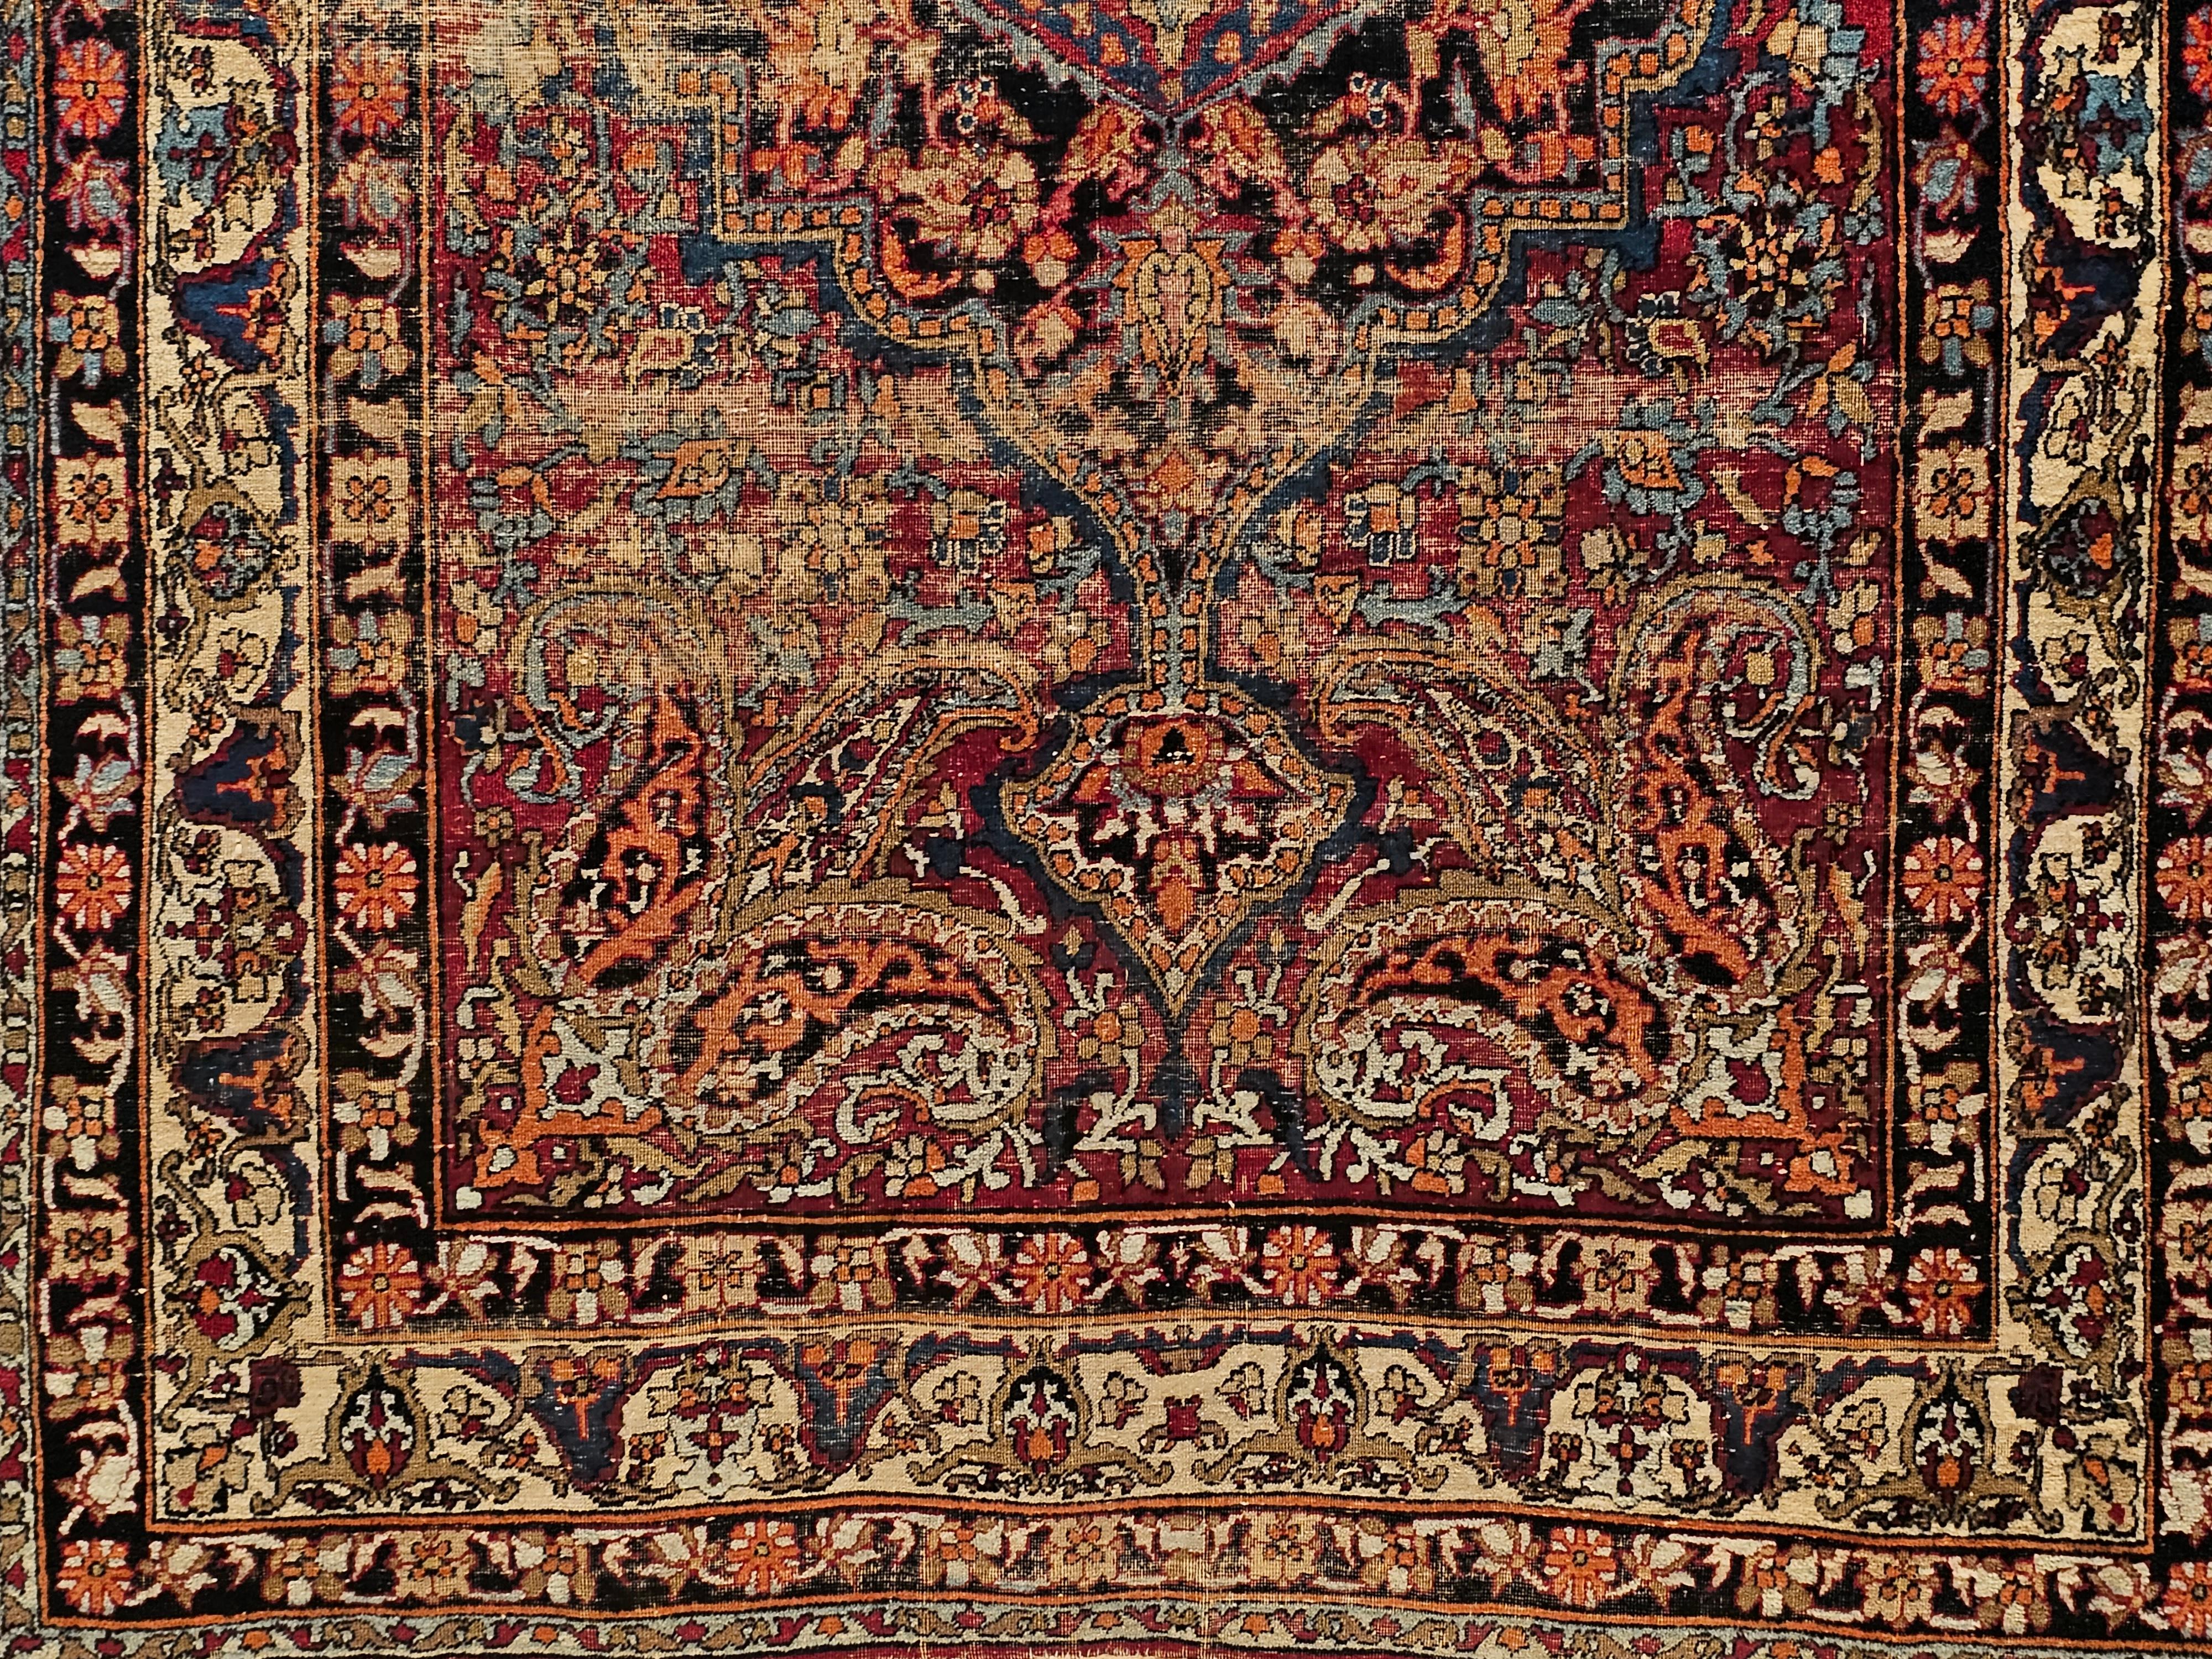 A 19th century Persian Silk Kashan area rug in floral/medallion design set on a red  field. The design and the color combination clearly demonstrates the mastery of the art of weaving in Kashan in this period.  There is a central extended medallion